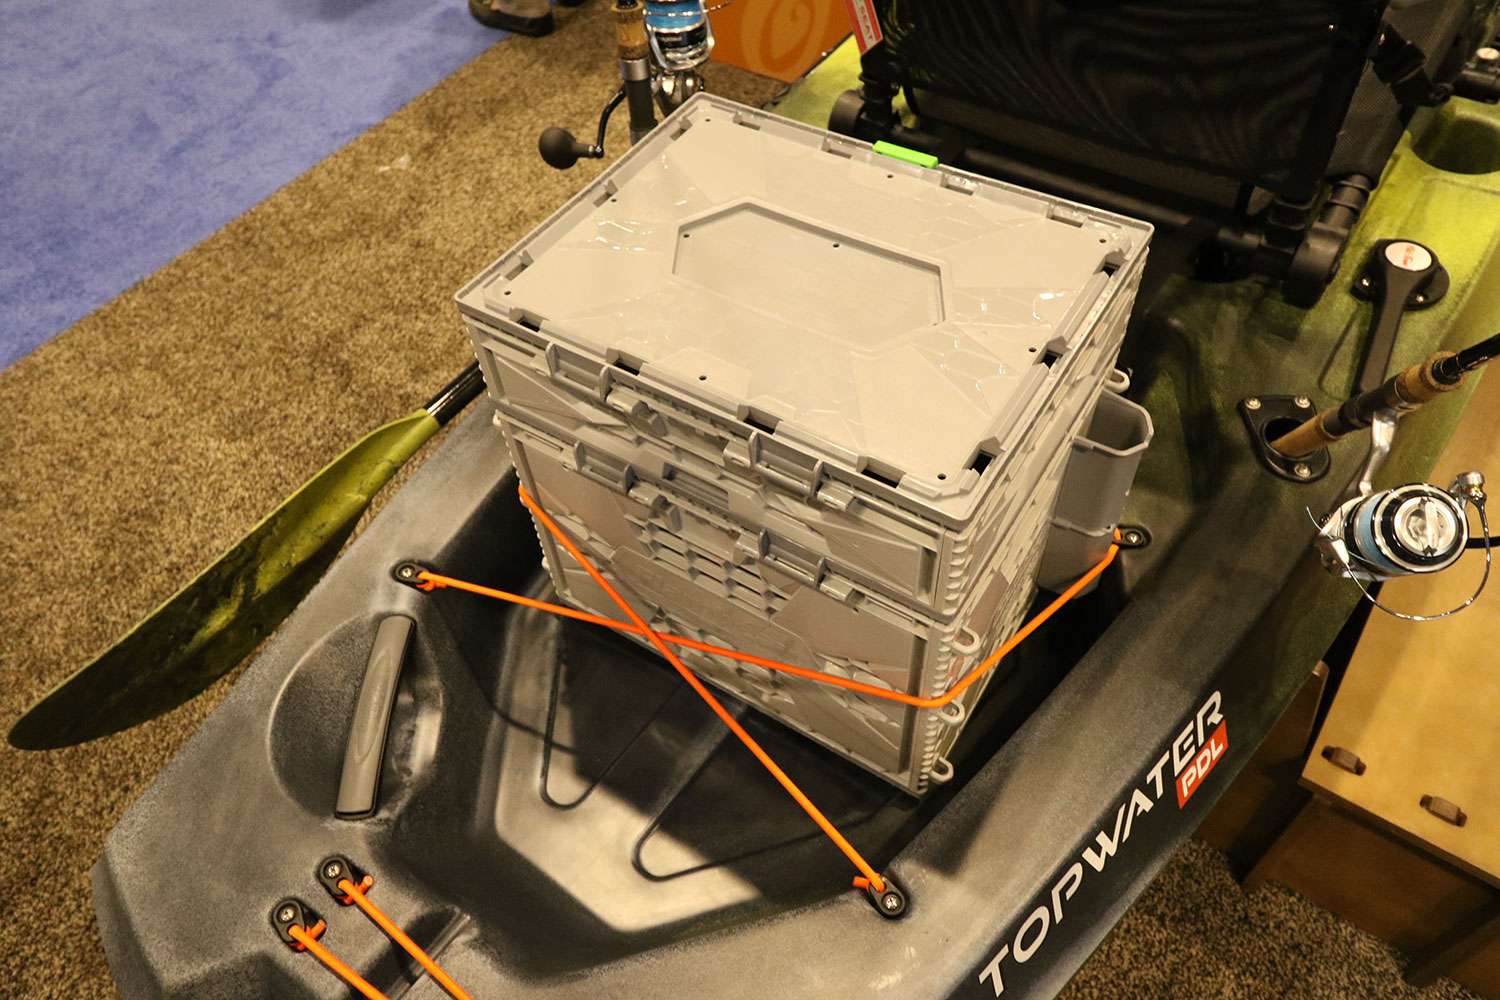 Flambeau makes a kayak tackle storage box that fits perfectly in the back of the Old Town kayaks. 